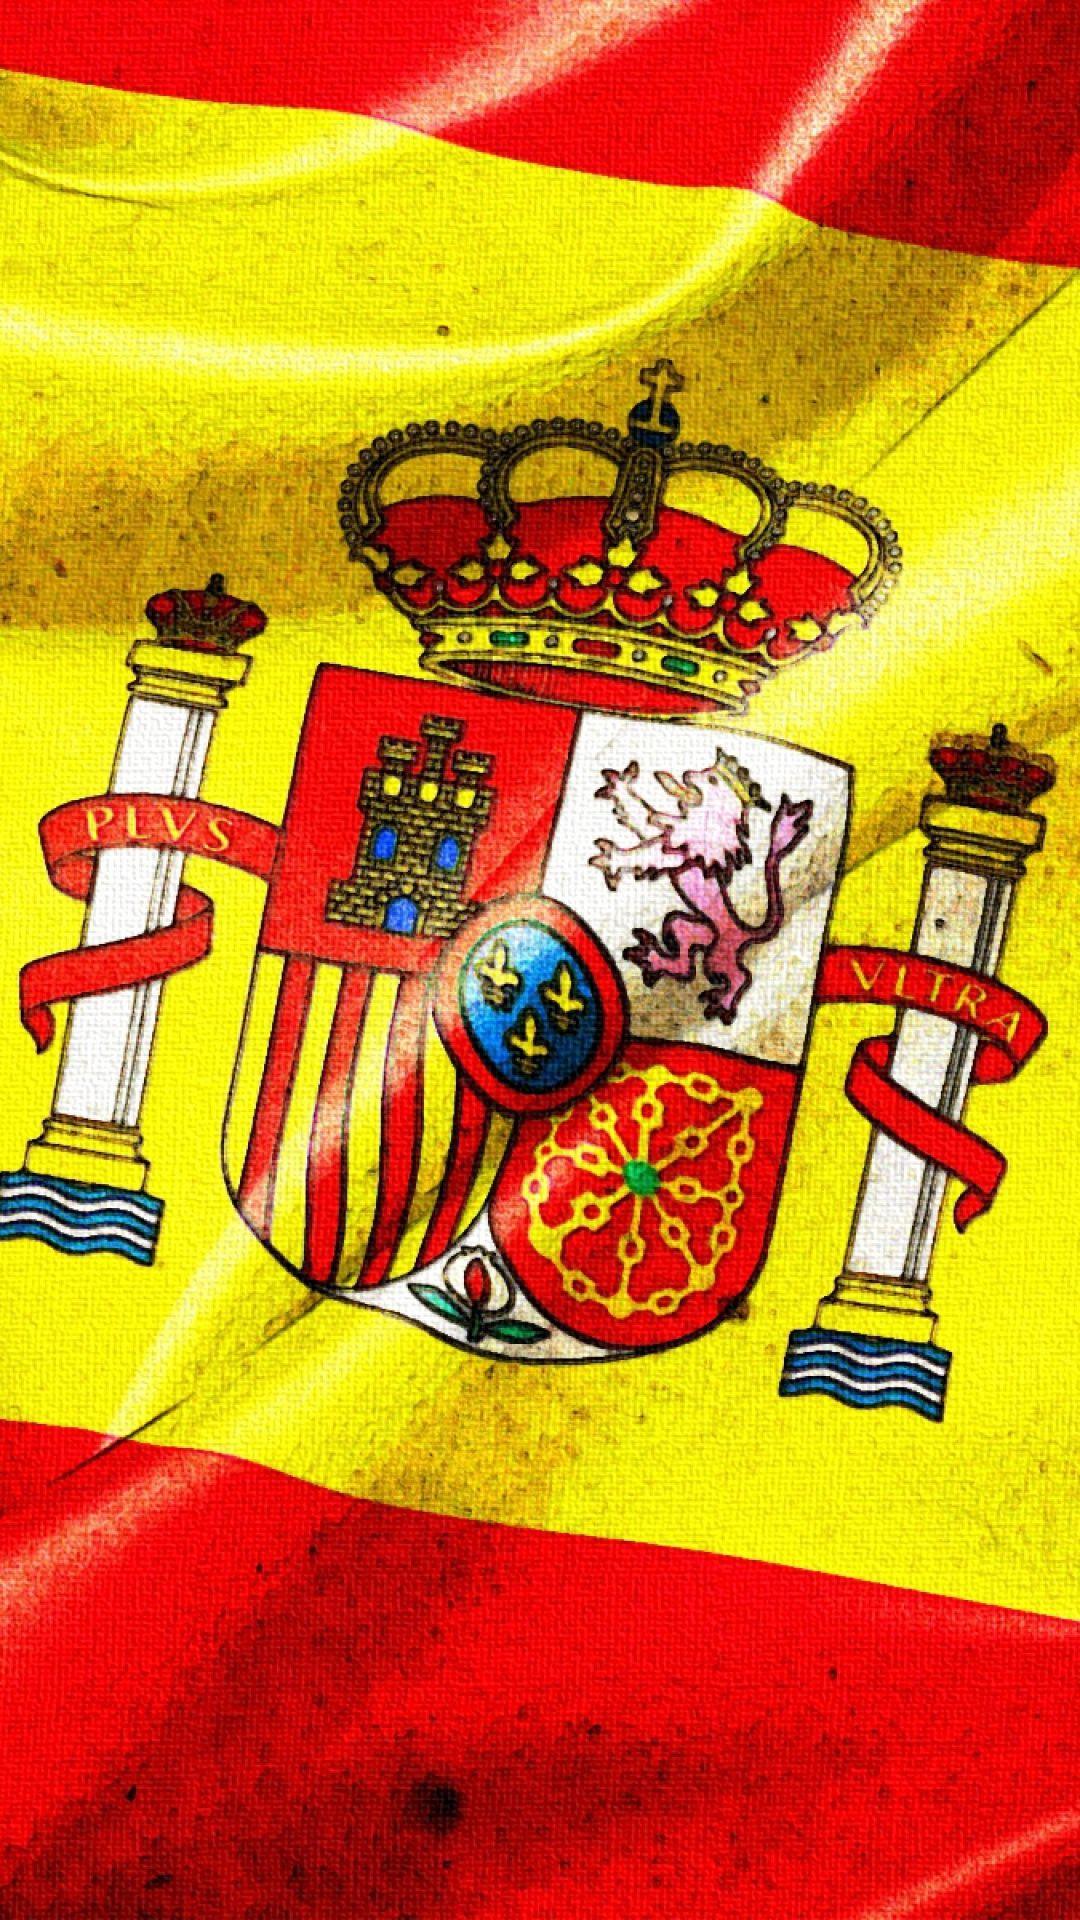 Spain Flag Image and Wallpaper for Mac, PC